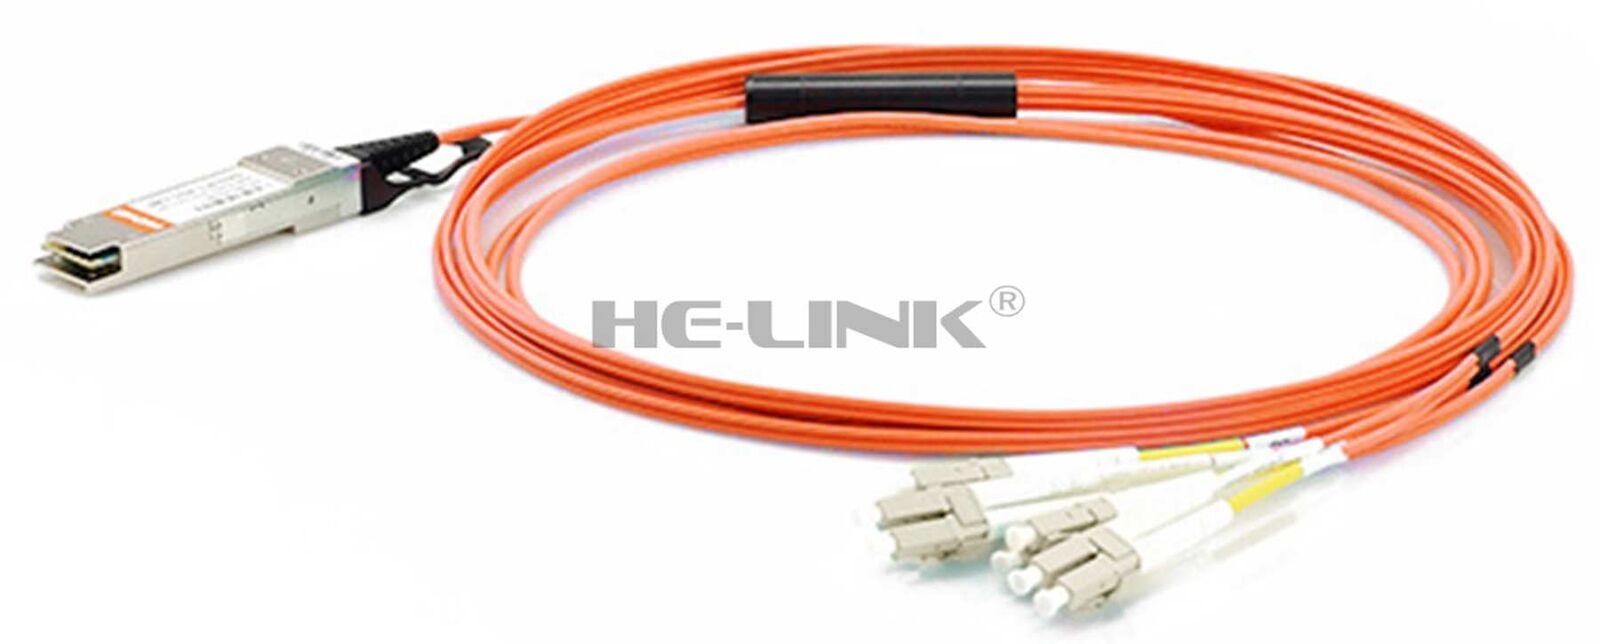 2m F10-QSFP-8LC-AOC2M Extreme Compatible 40G QSFP+ to 4 Duplex LC AOC Cable